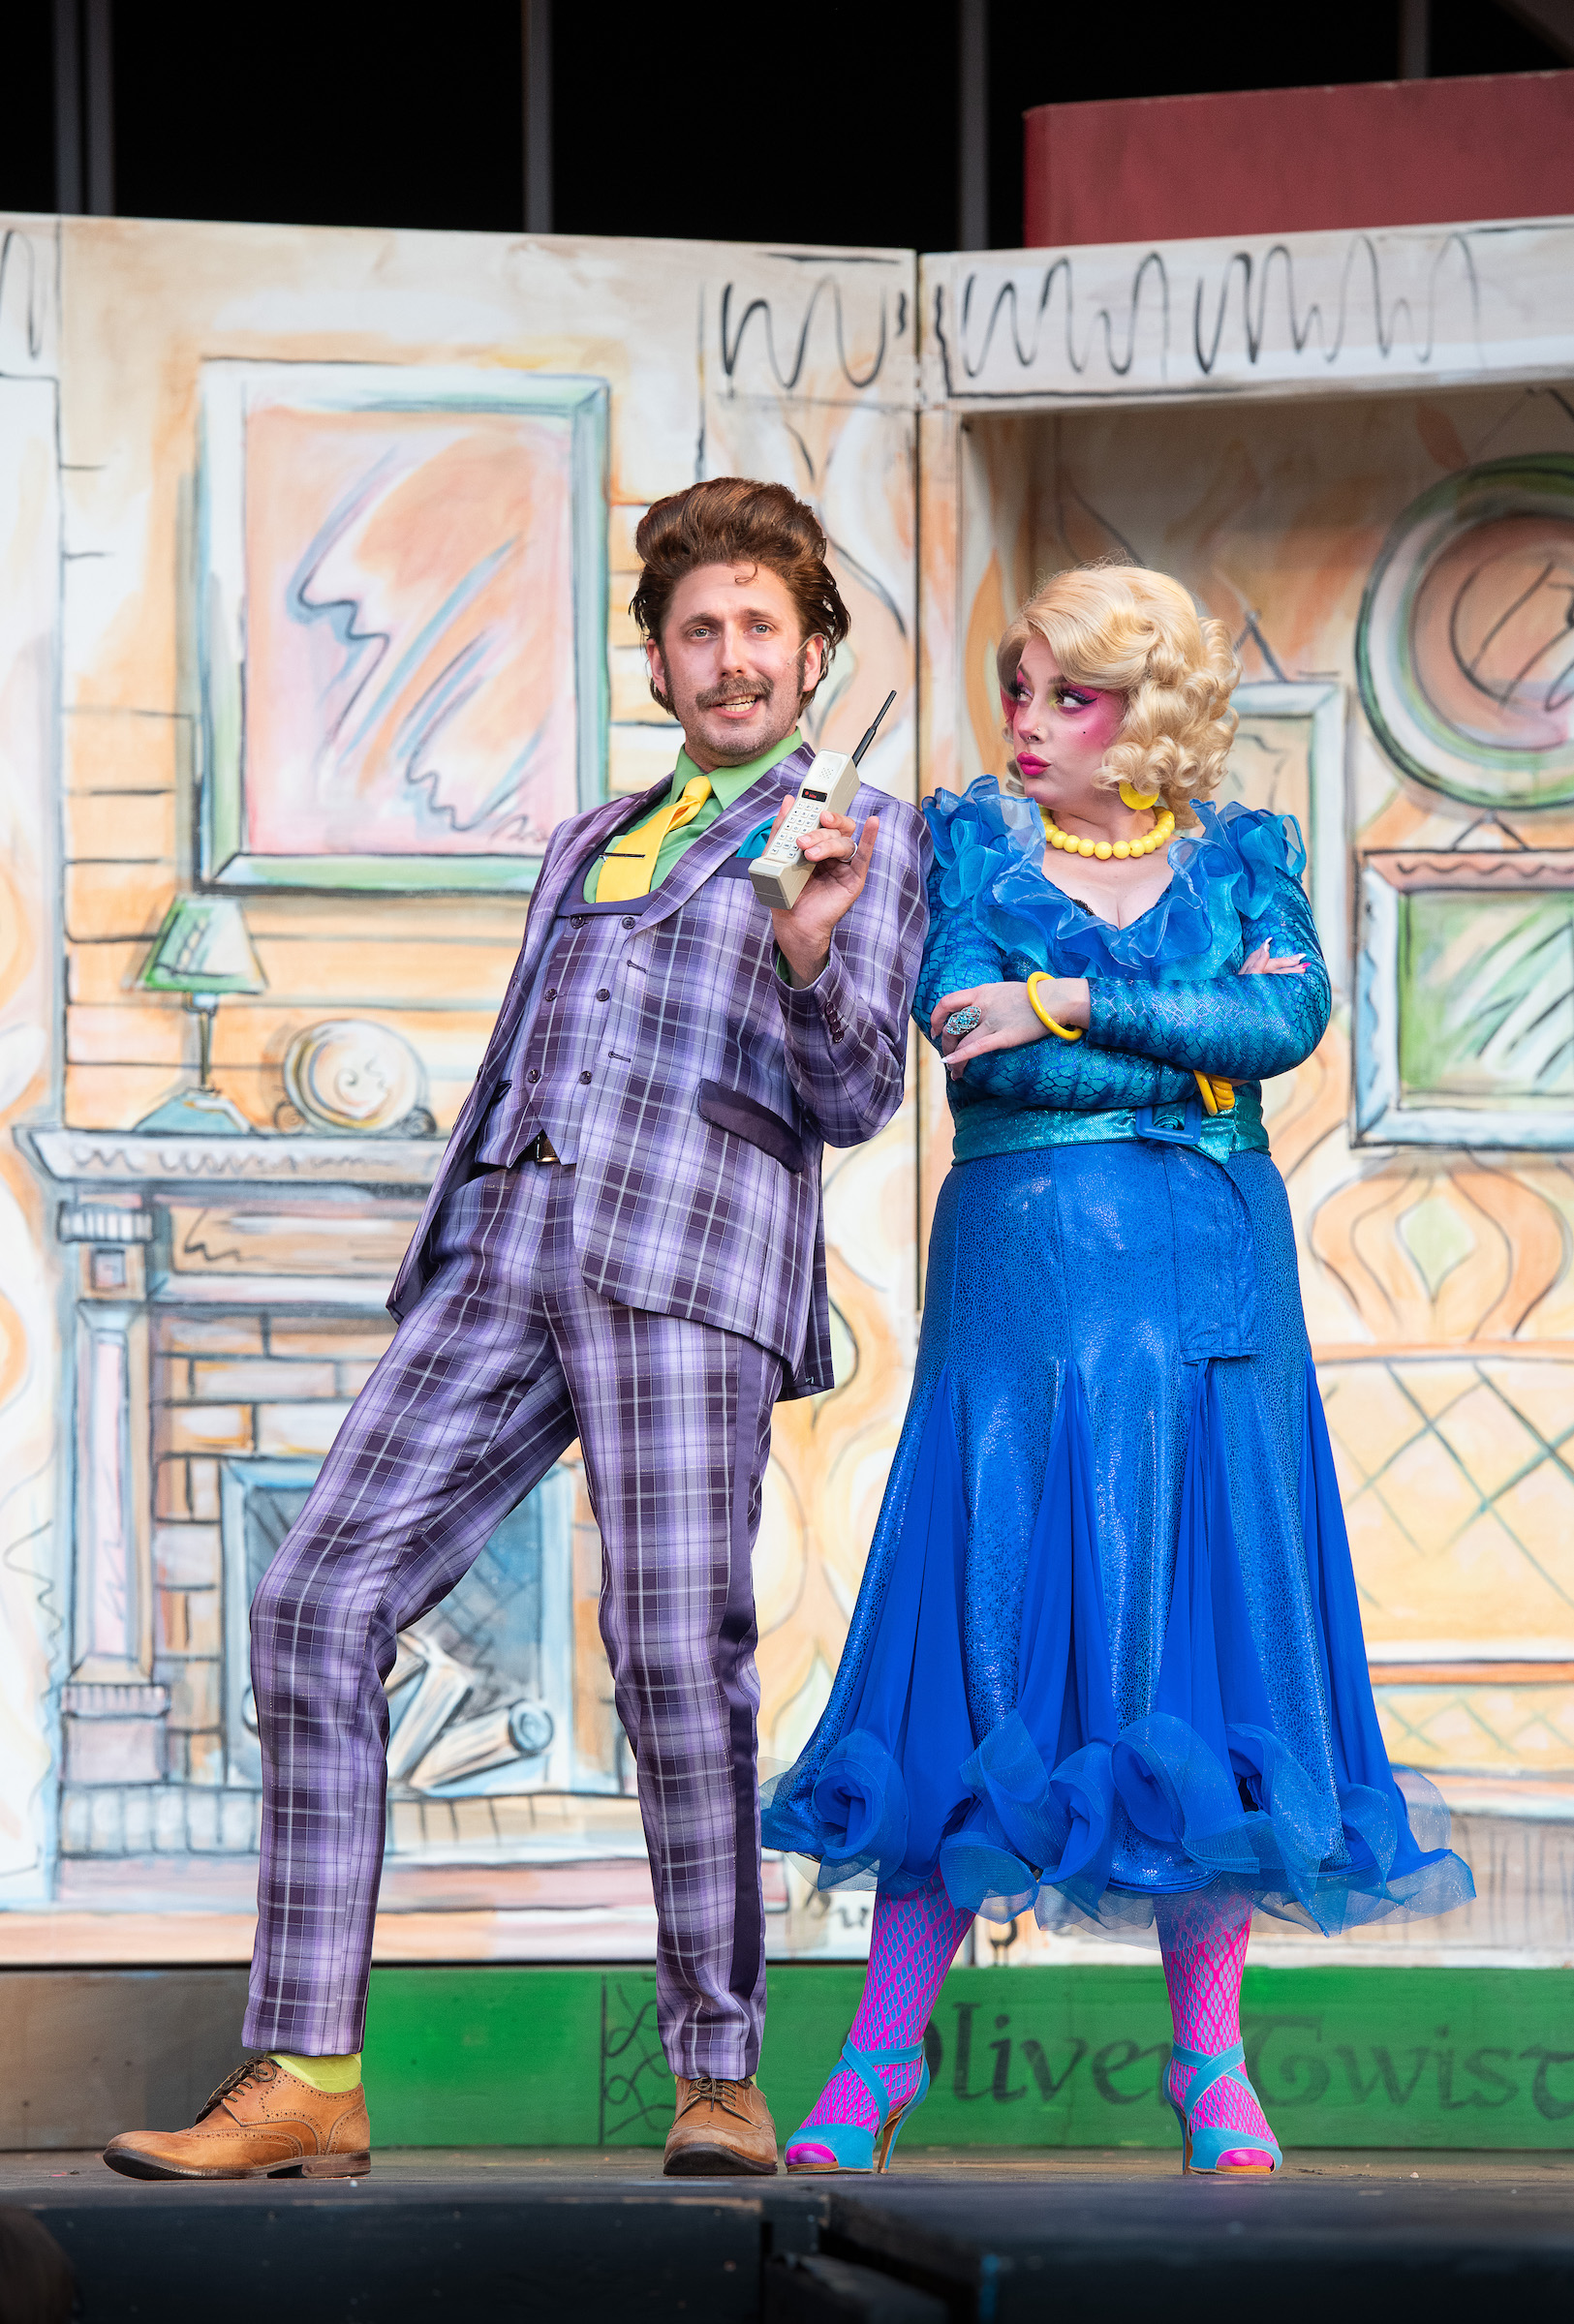 A photo of two characters from Matilda, Mr and Mrs Wormsworth standing on stage in front of an illustrated landscape backdrop. Mrs wormsworth has exaggerated makeup like red cheeks and pale foundation, and fluffy blonde hair. Her arms are crossed and she’s wearing a blue formal dress, staring at Mr. Wormsworth. Mr. Womswoth wears a purple checkered suit, has puffy brown hair and mustache, and has a mischievous look on his face, holding a vintage phone out in one hand.